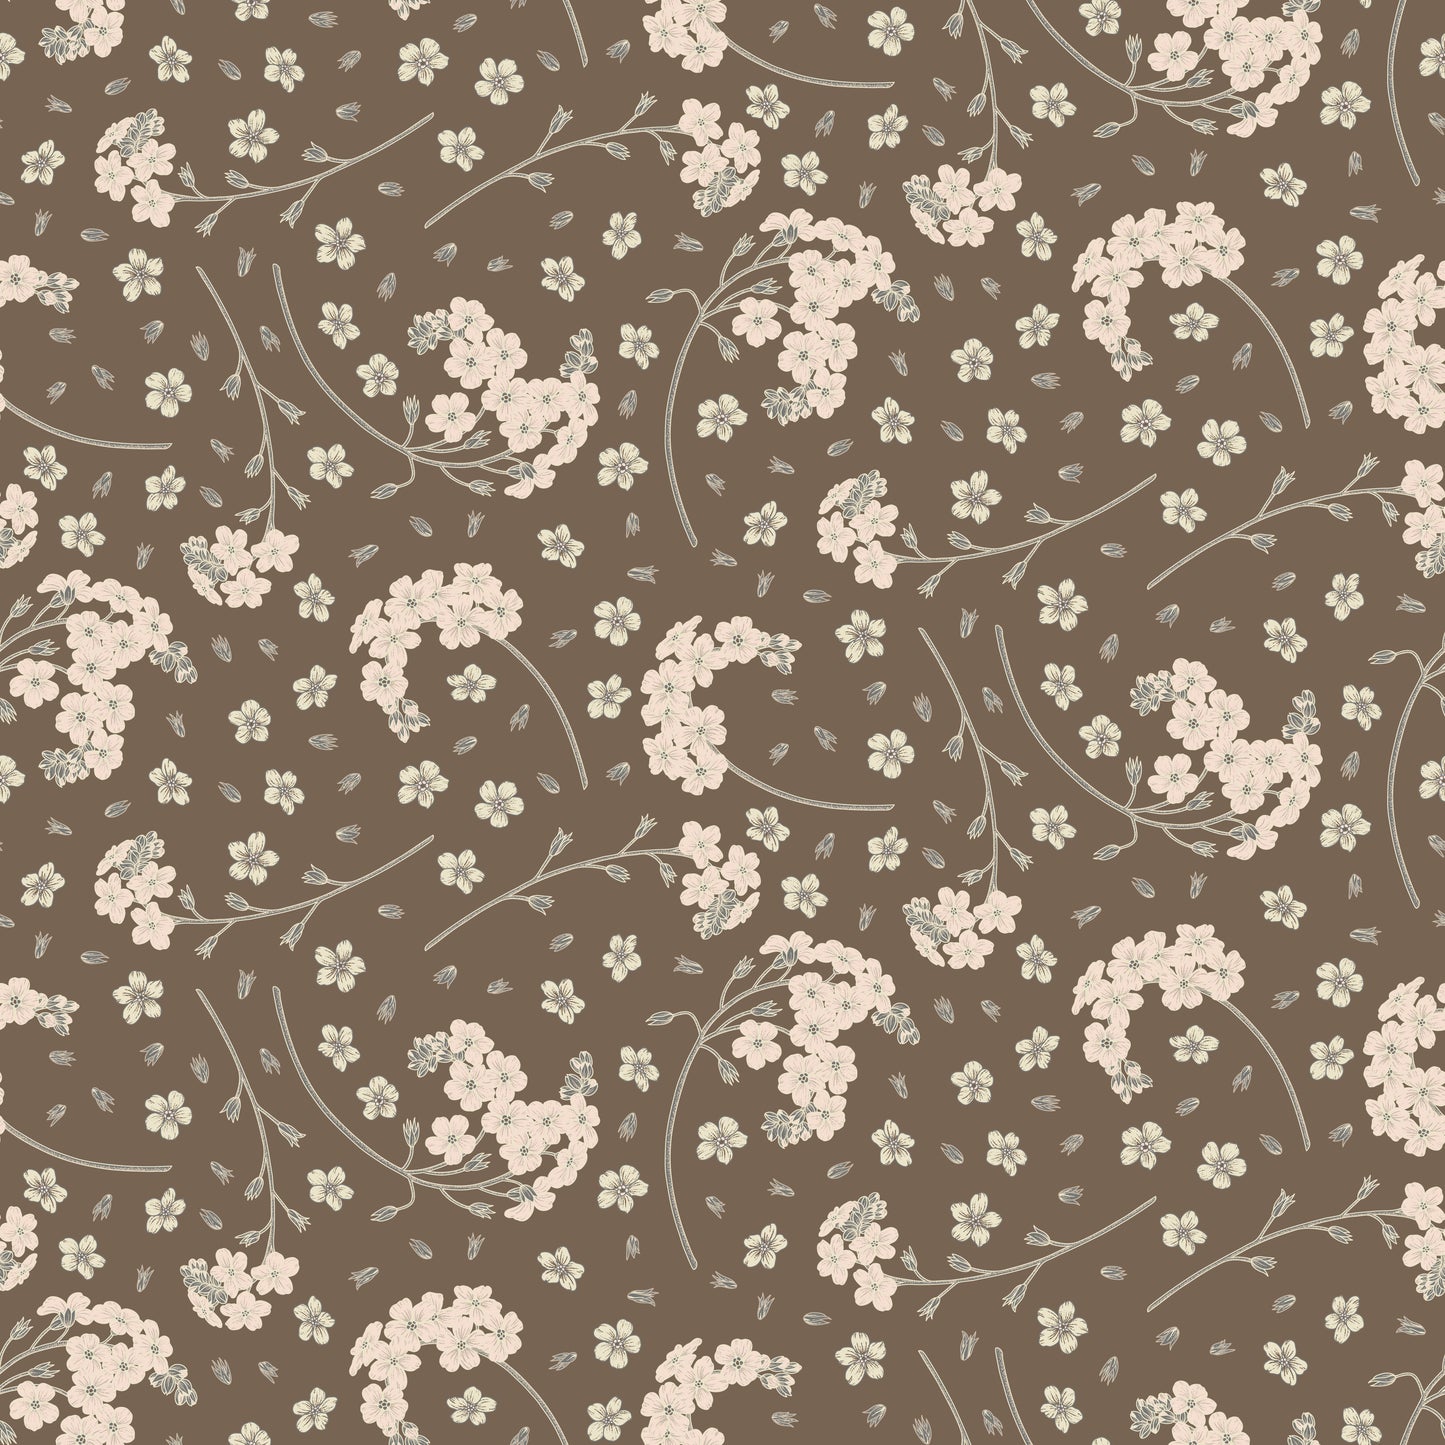 White forget me not flower print on brown background easy to install and remove peel and stick custom wallpaper available in different lengths/sizes locally created and printed in Canada. Removable, washable, durable, commercial grade, customizable and water proof.